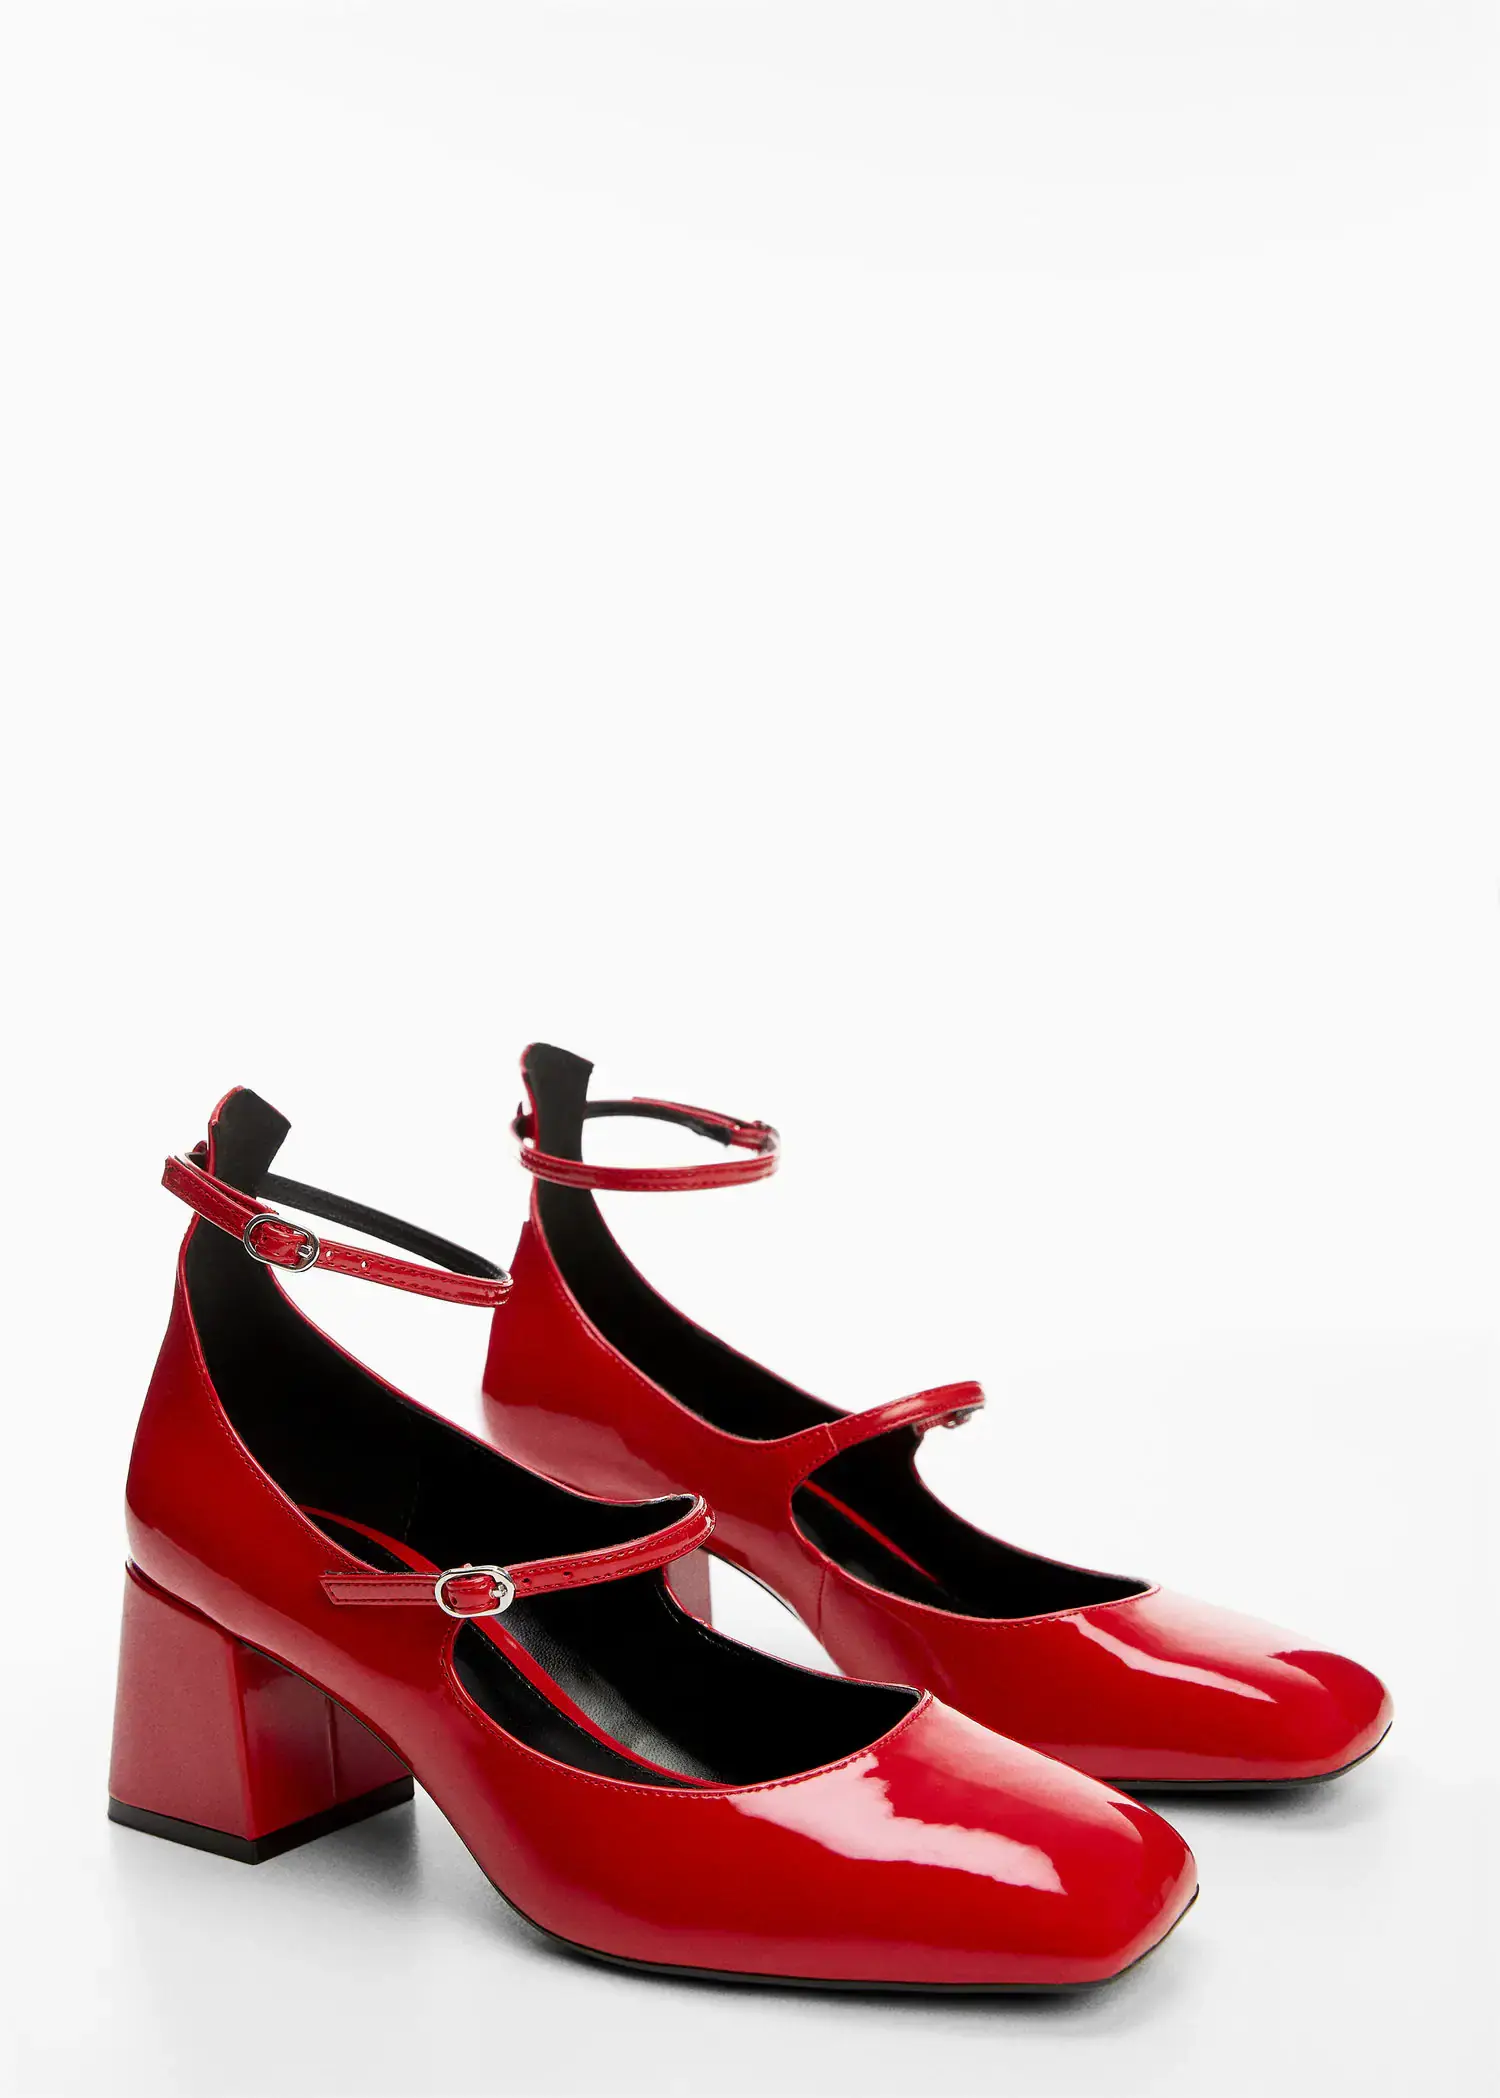 Mango Patent leather buckled shoes. 3